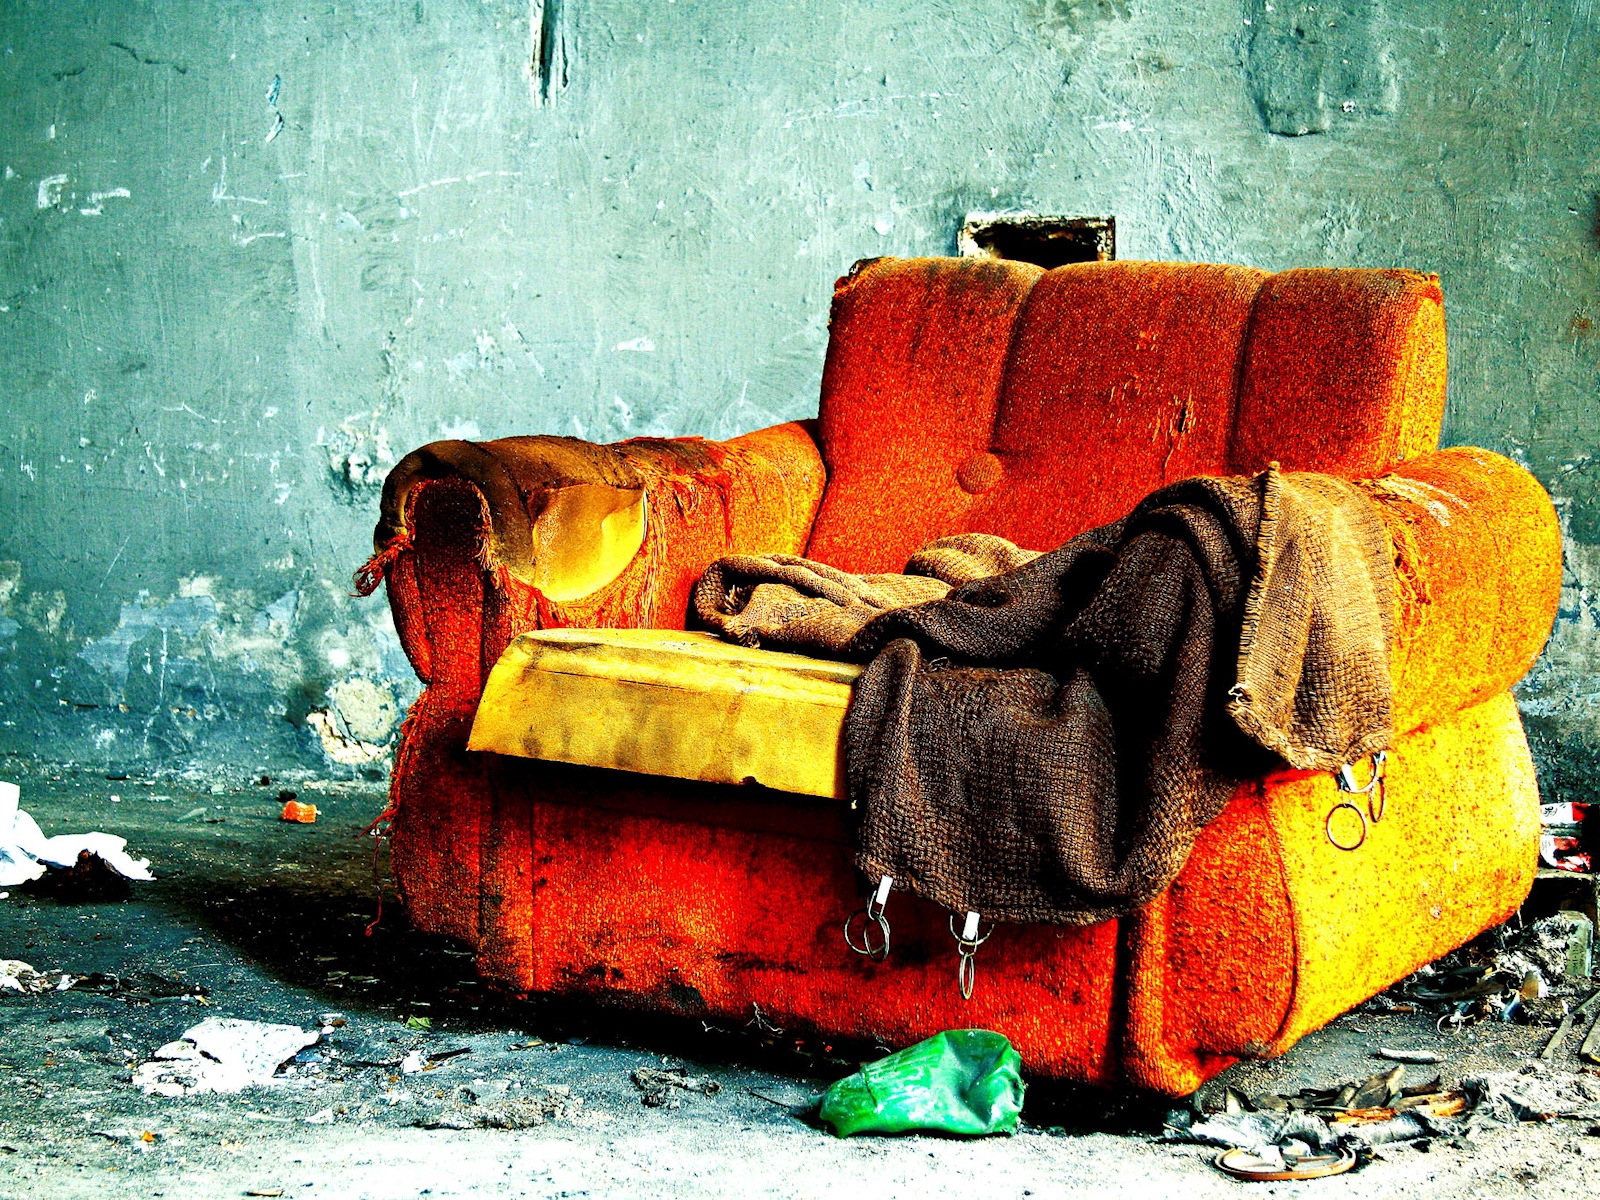 colourful, miscellanea, miscellaneous, old, colorful, armchair, ancient, ragged wallpaper for mobile